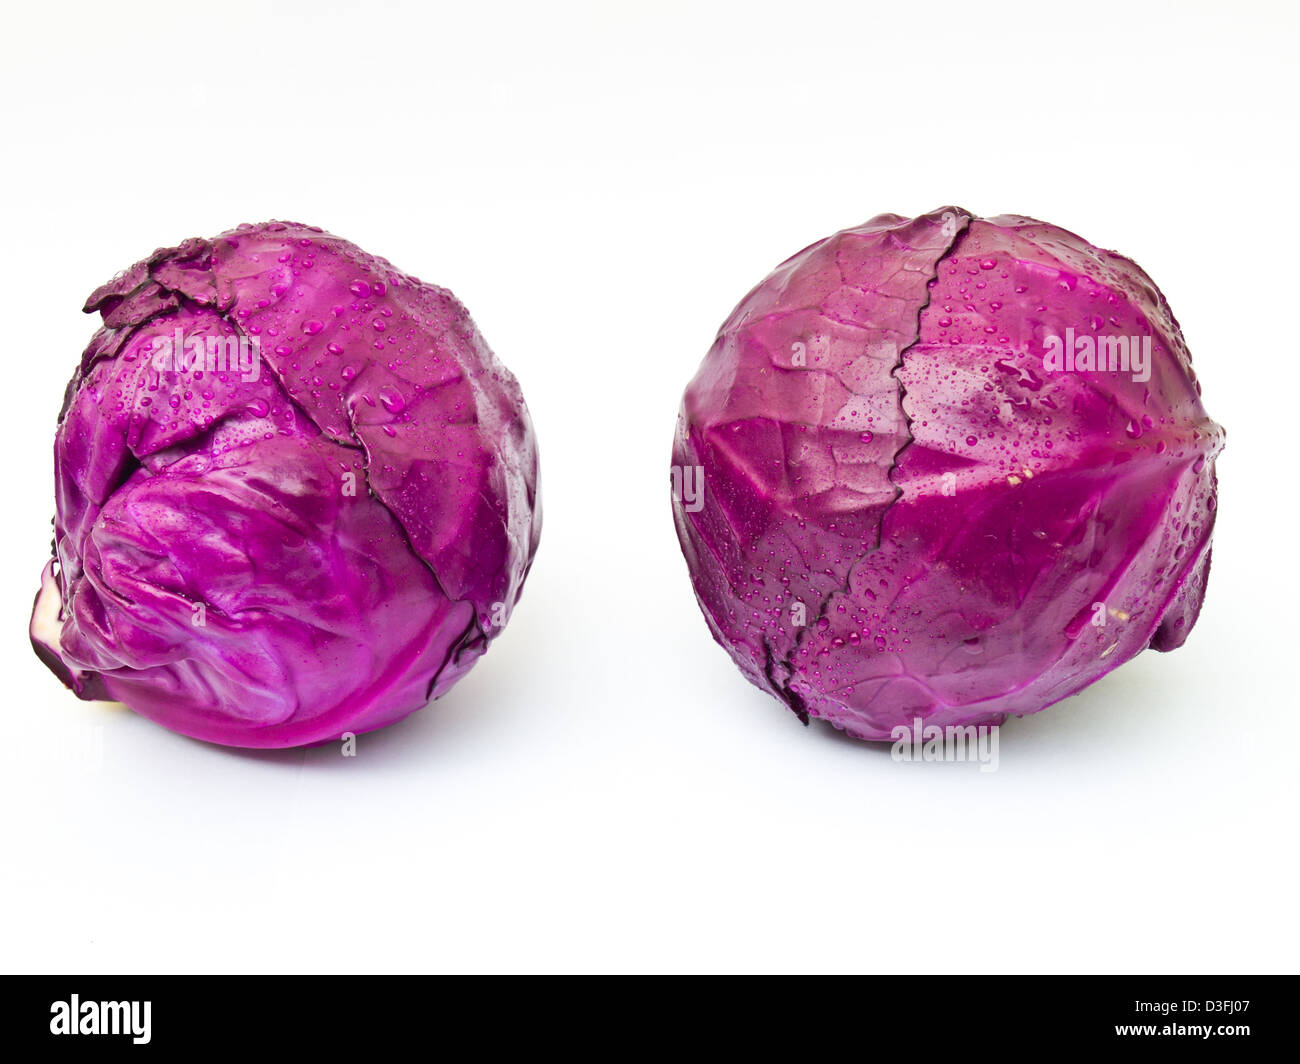 Red cabbage heads isolated on white background Stock Photo